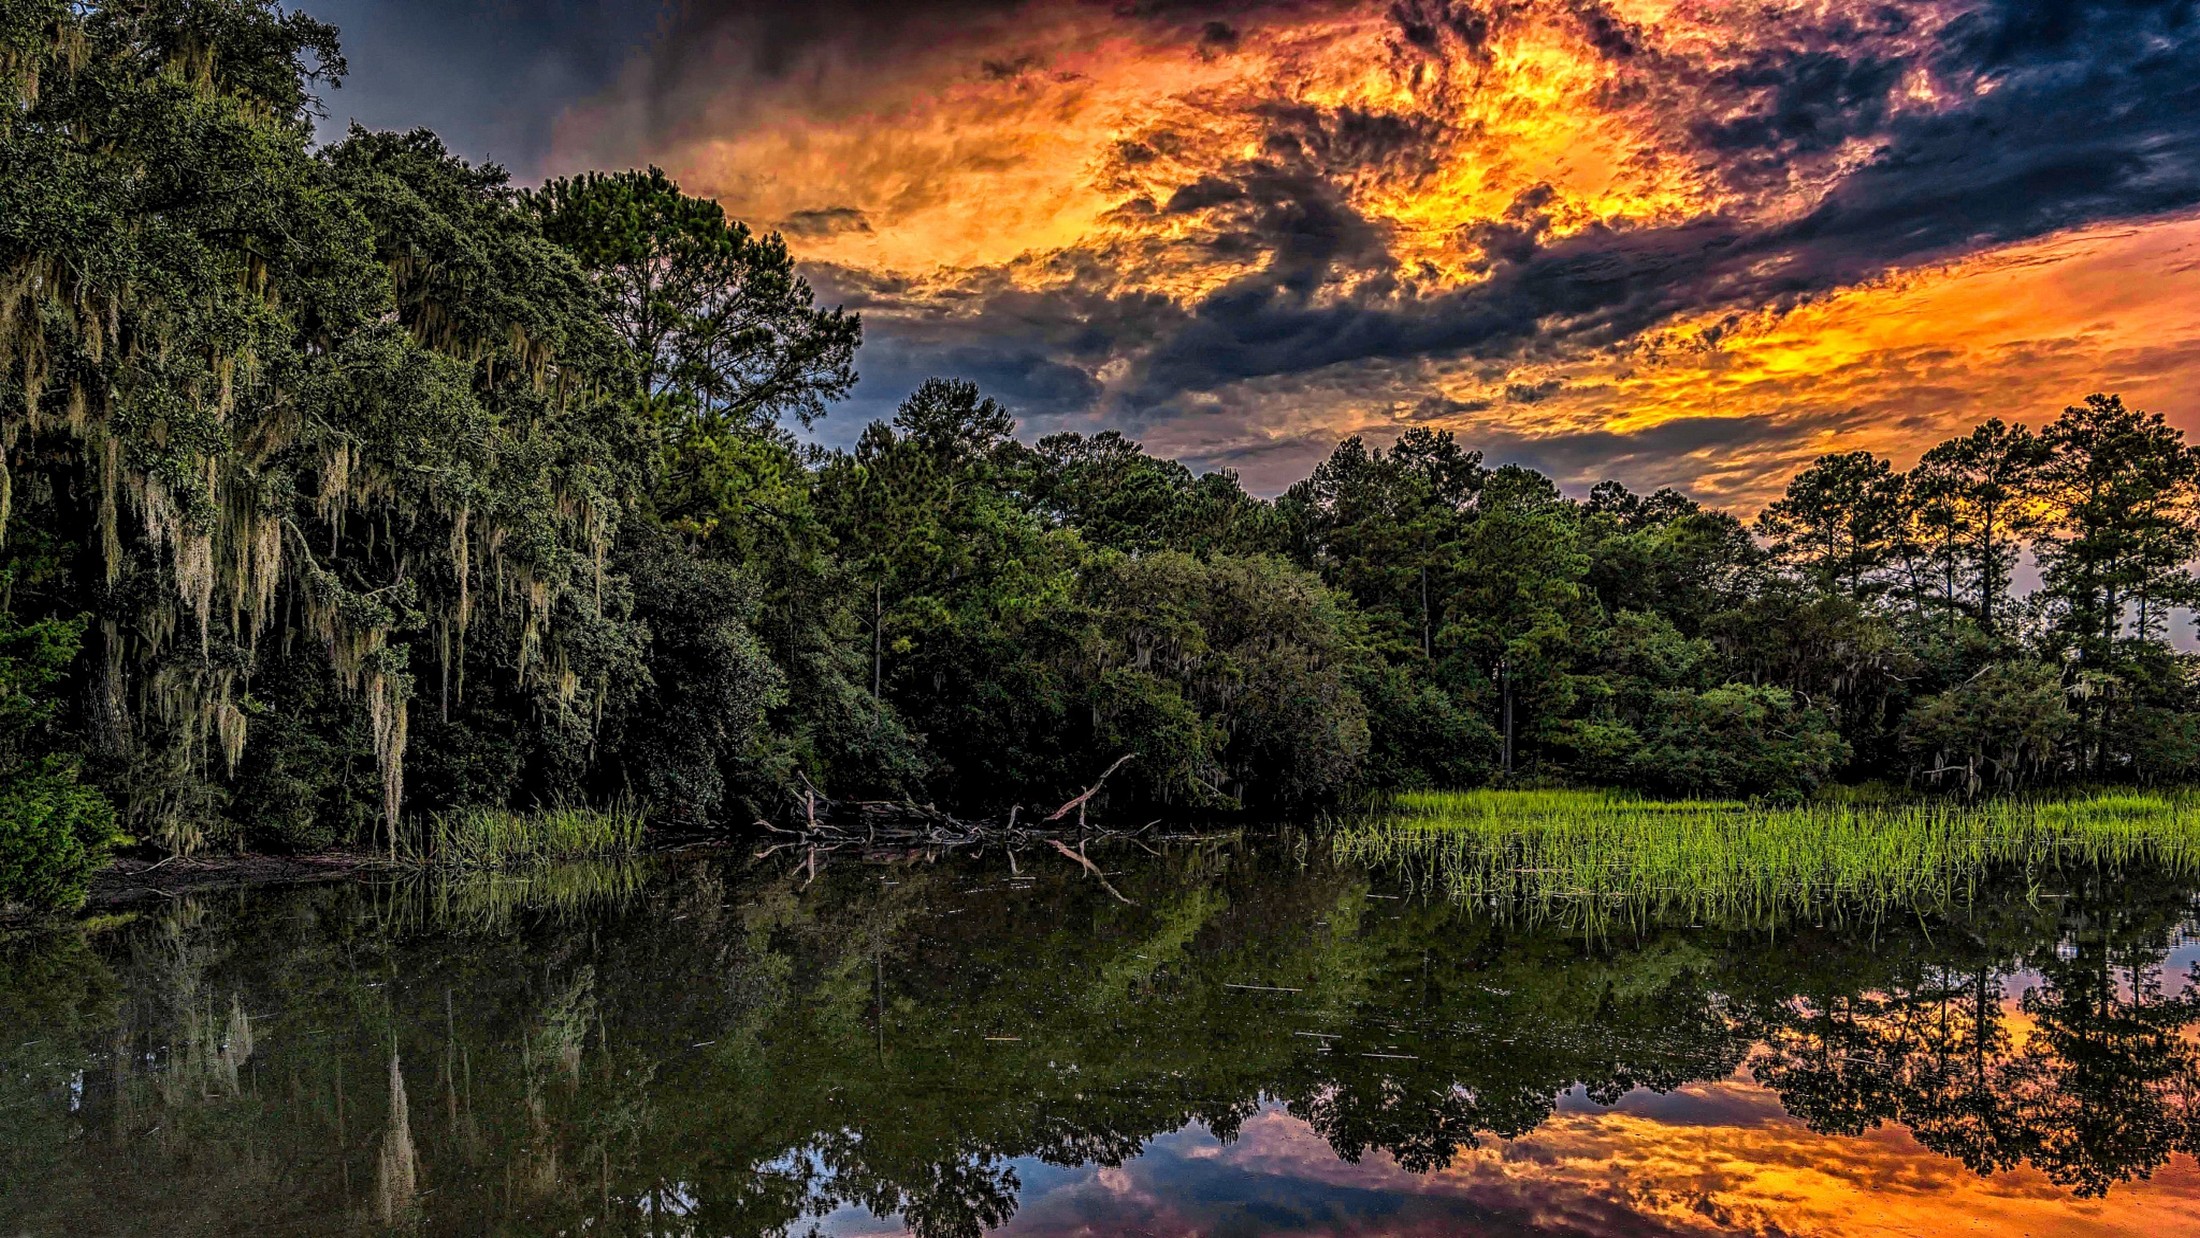 General 2200x1238 nature landscape sunset HDR river reflection summer South Carolina clouds forest sky water trees foliage reeds USA